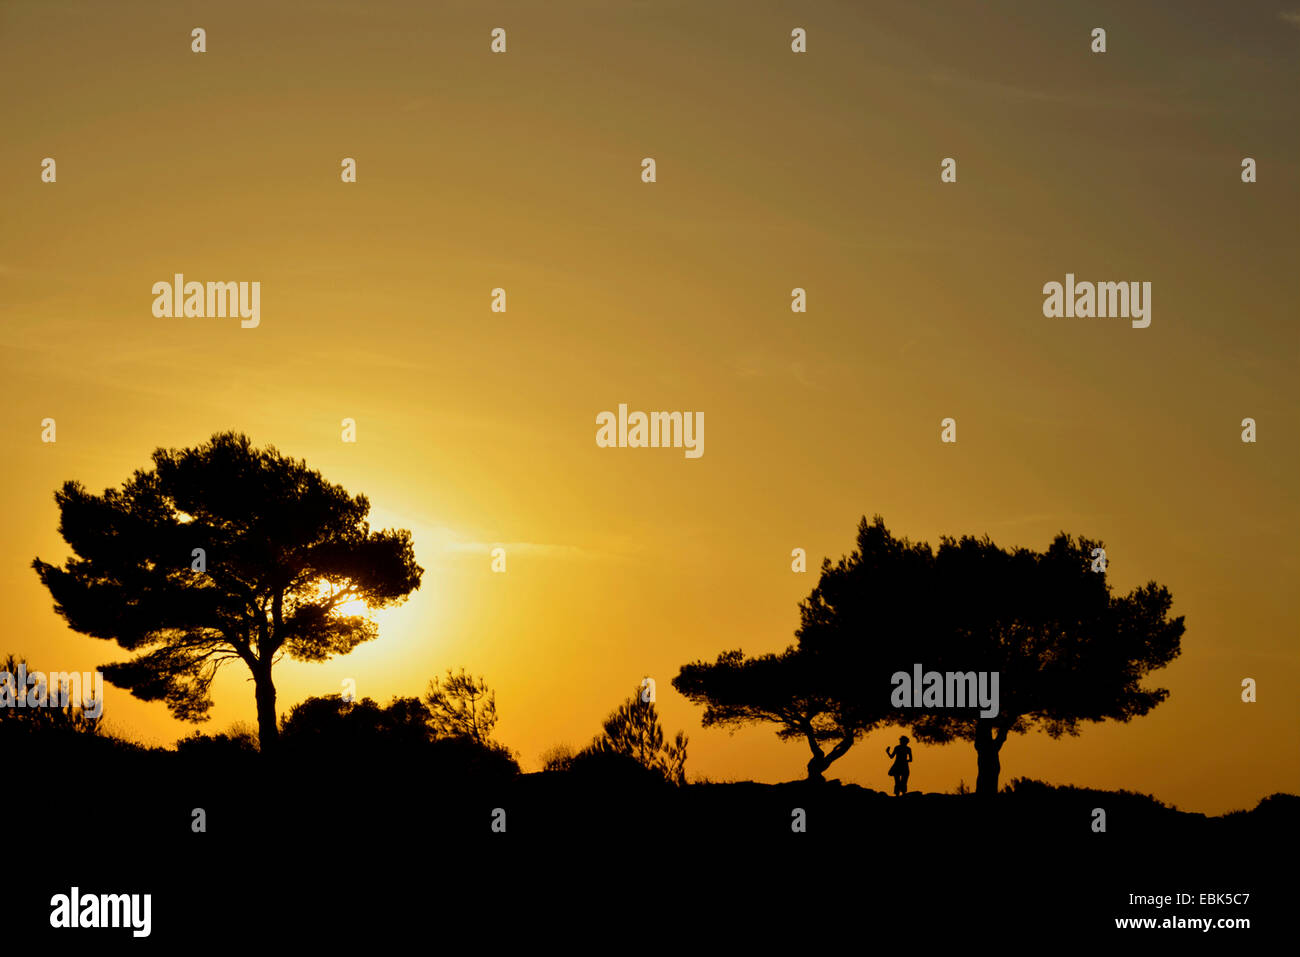 Stone pine, Italian Stone pine, Umbrella Pine (Pinus pinea), silhouettes in sunset, France, Provence, Calanques National Park Stock Photo